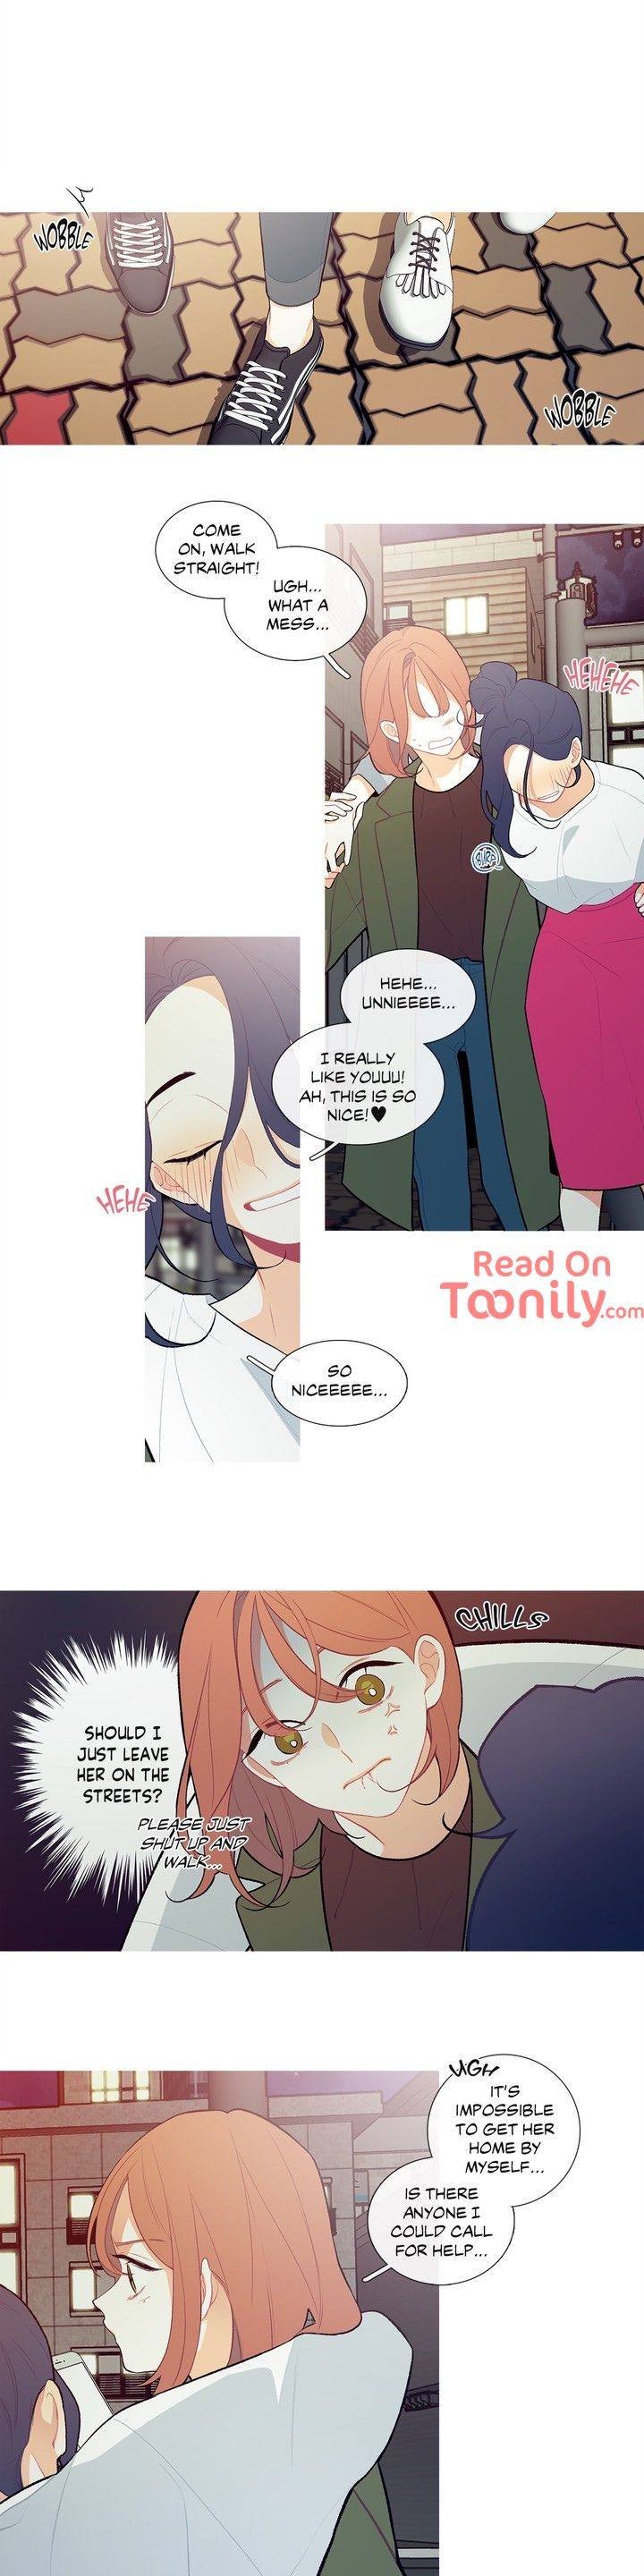 whats-going-on-chap-8-10